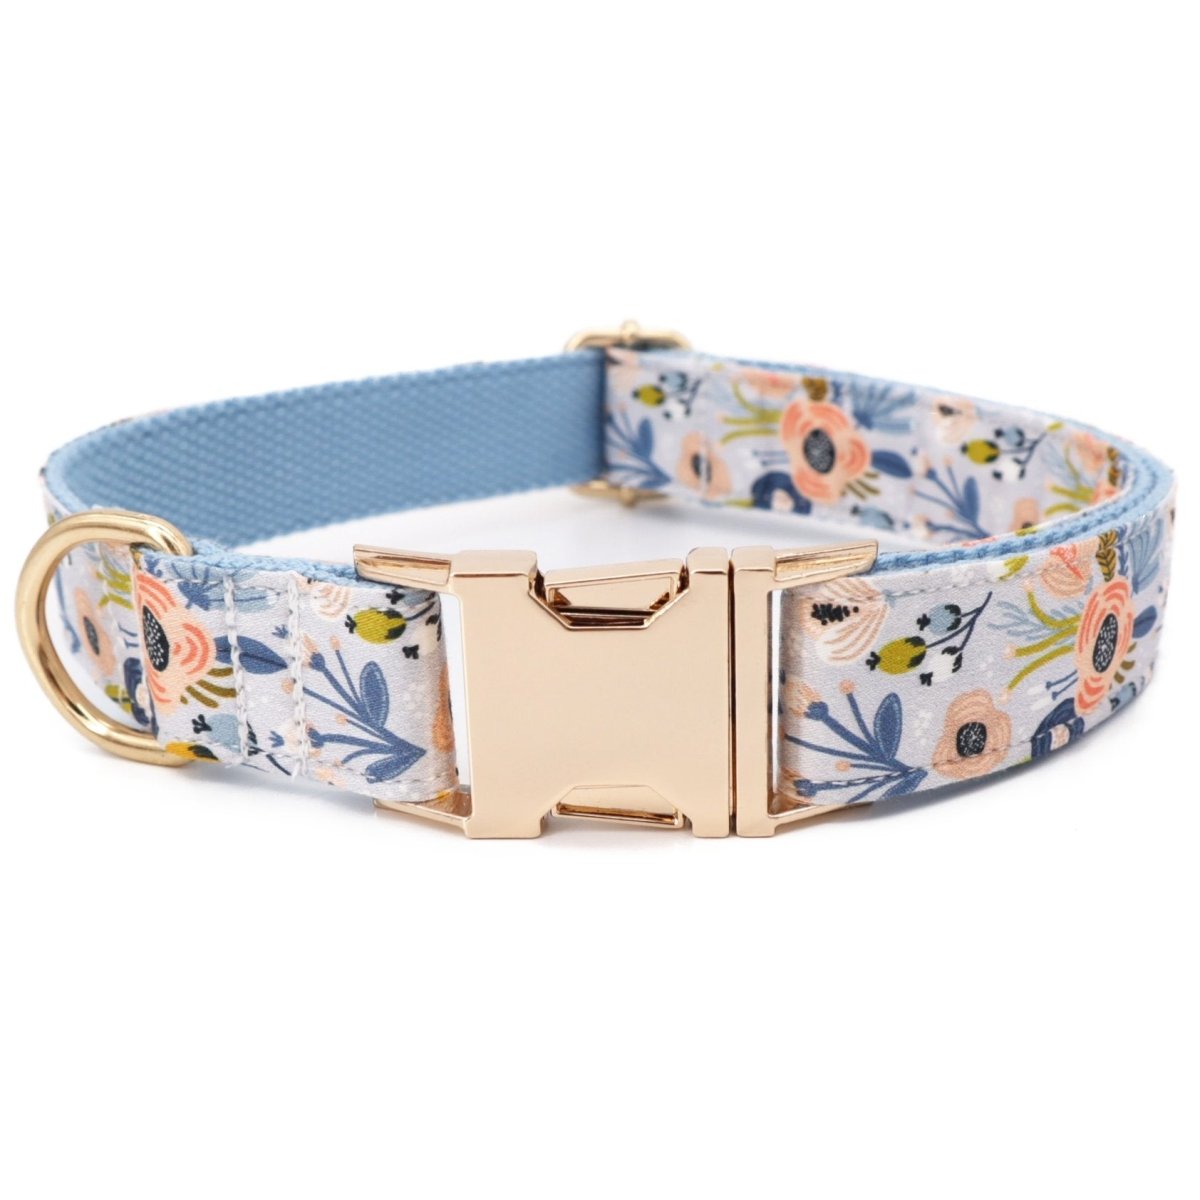 girl dog collar accessories - dog collar with flowers for wedding - dog collar and leash